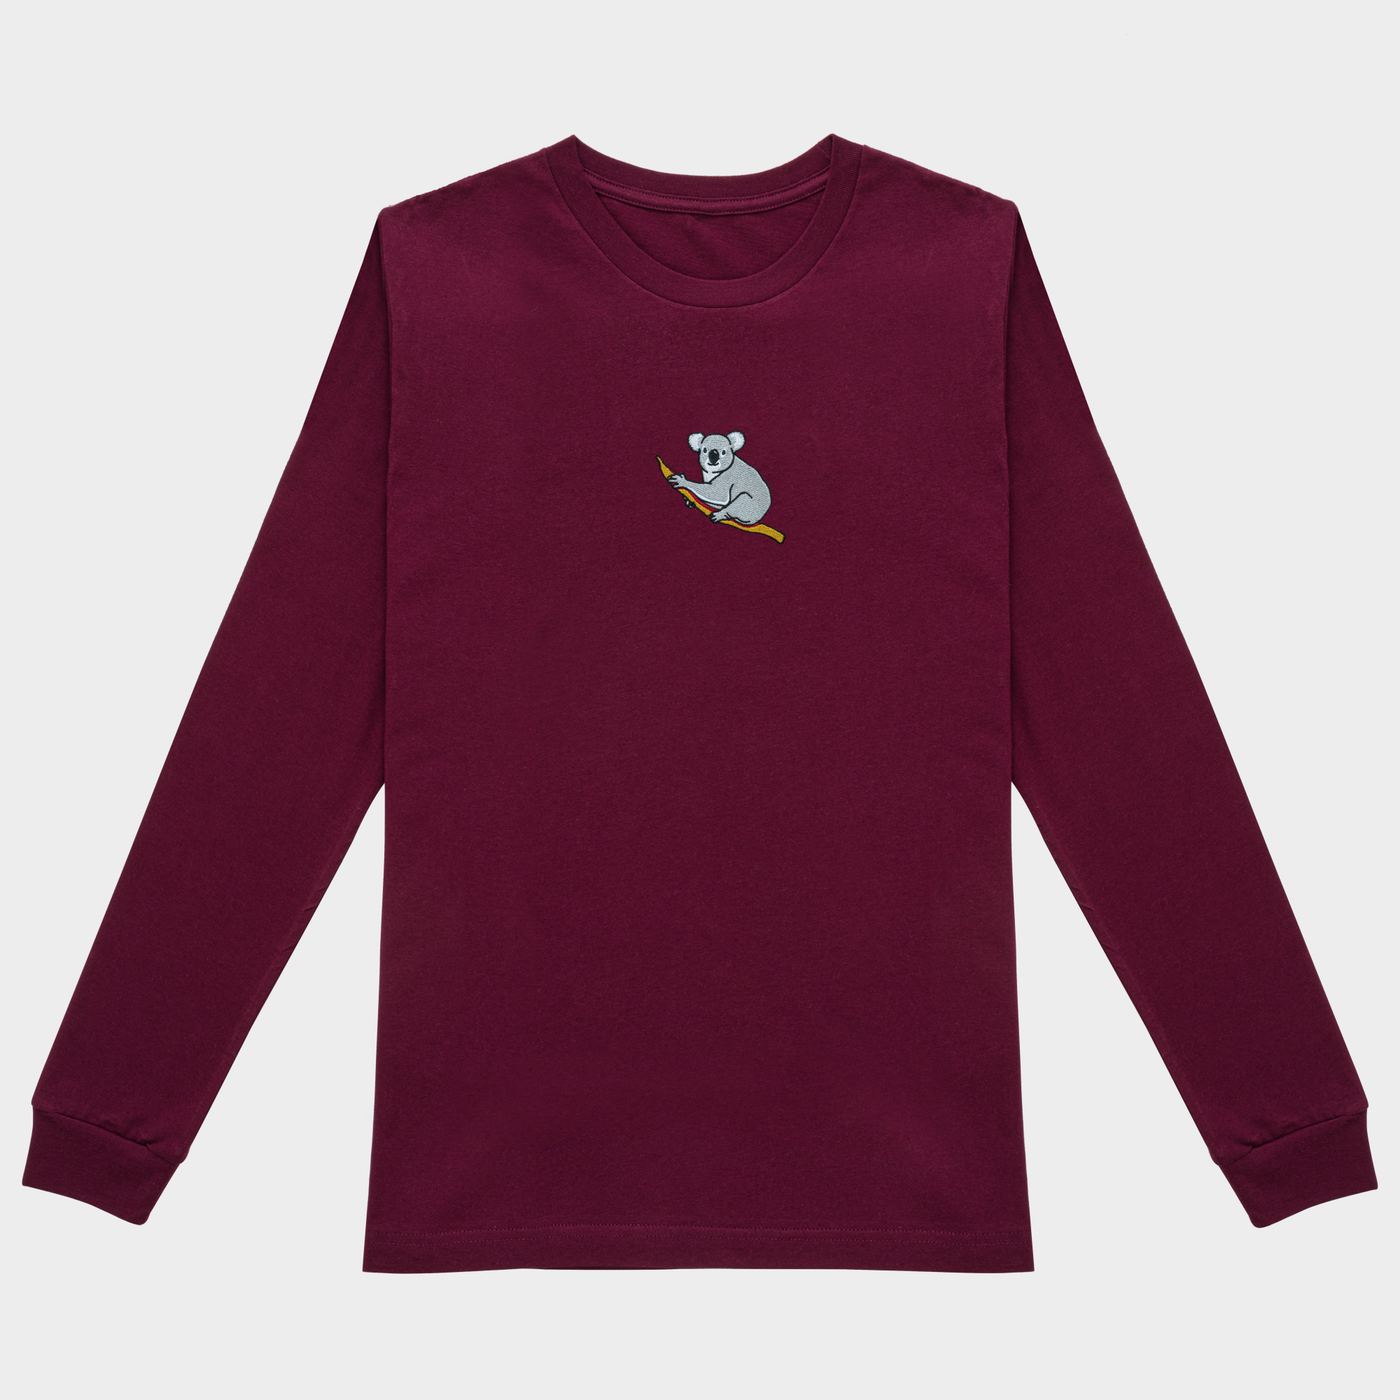 Bobby's Planet Women's Embroidered Koala Long Sleeve Shirt from Australia Down Under Animals Collection in Maroon Color#color_maroon